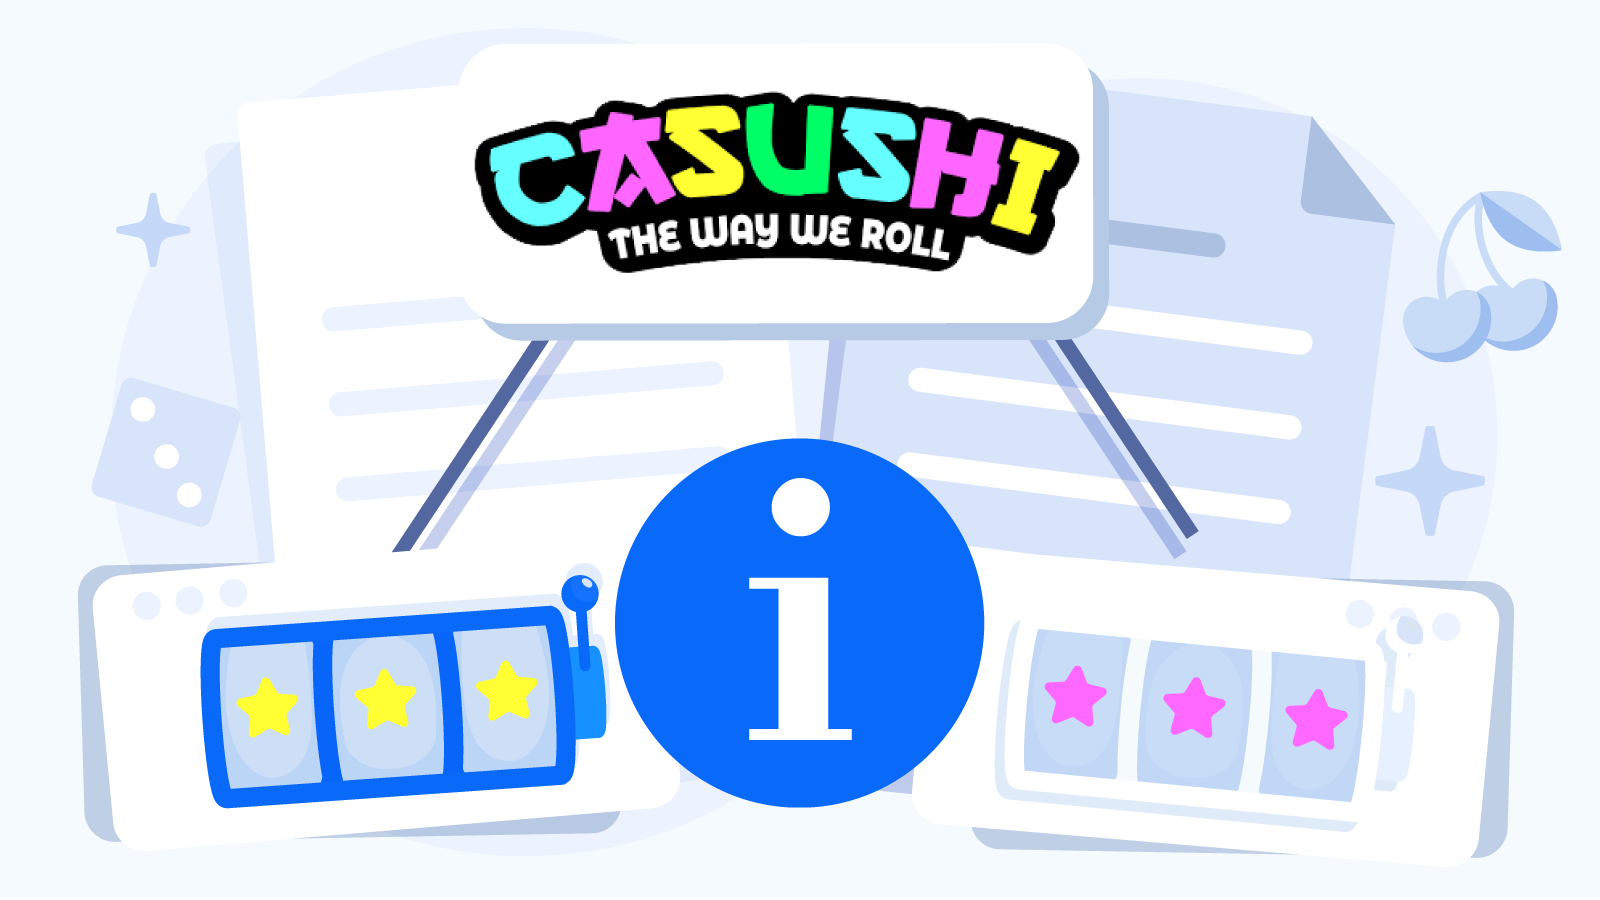 Who Are the Casushi Casino Sister Sites